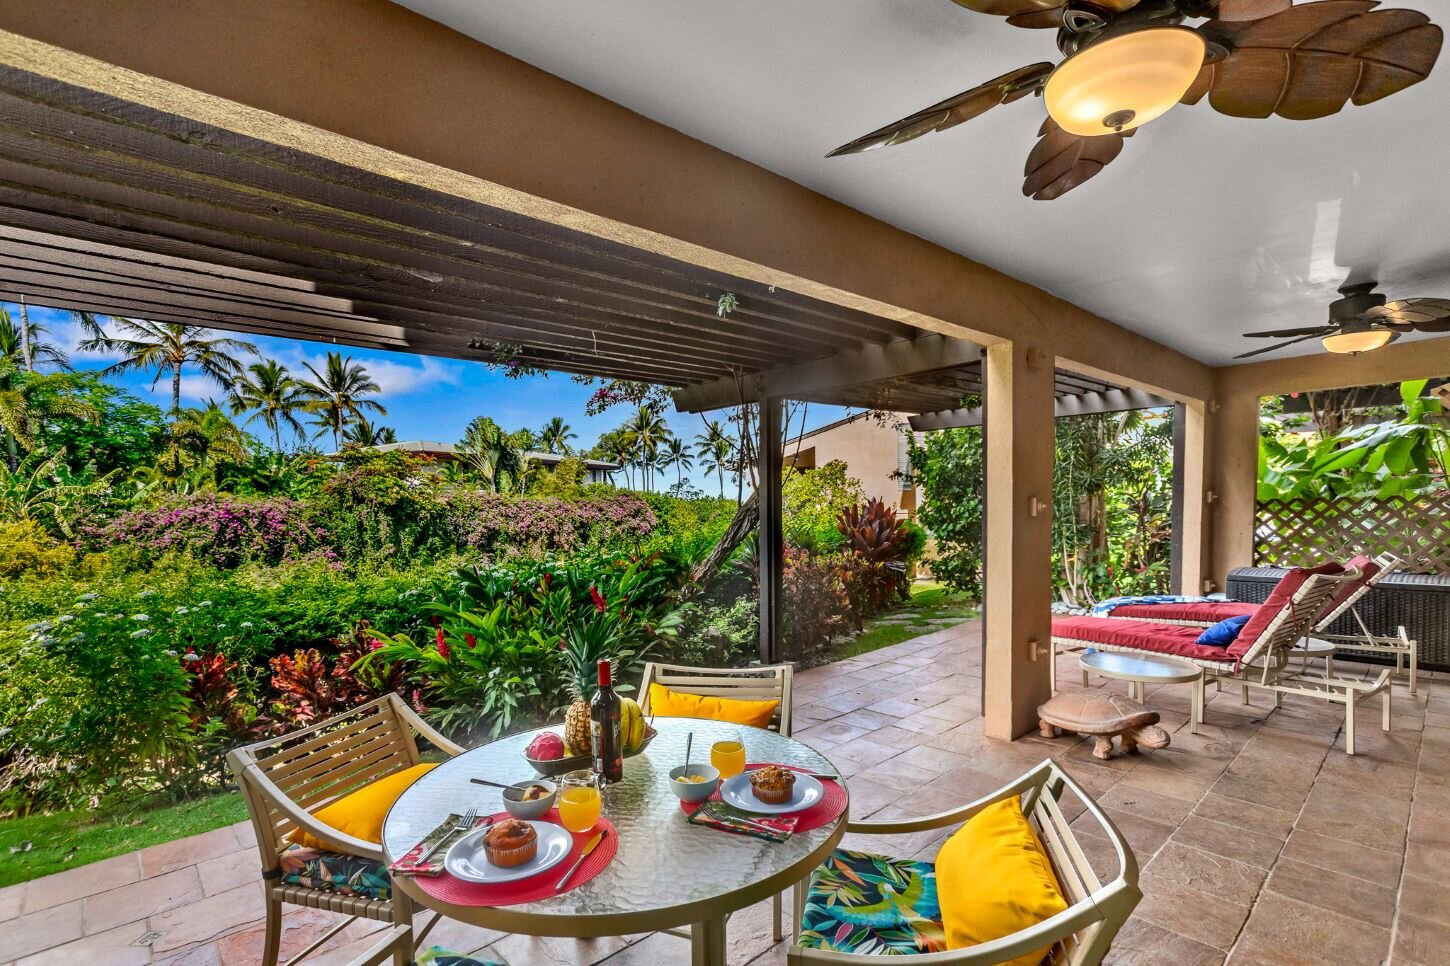 Lots of room to stretch out and privacy on our large lanai.